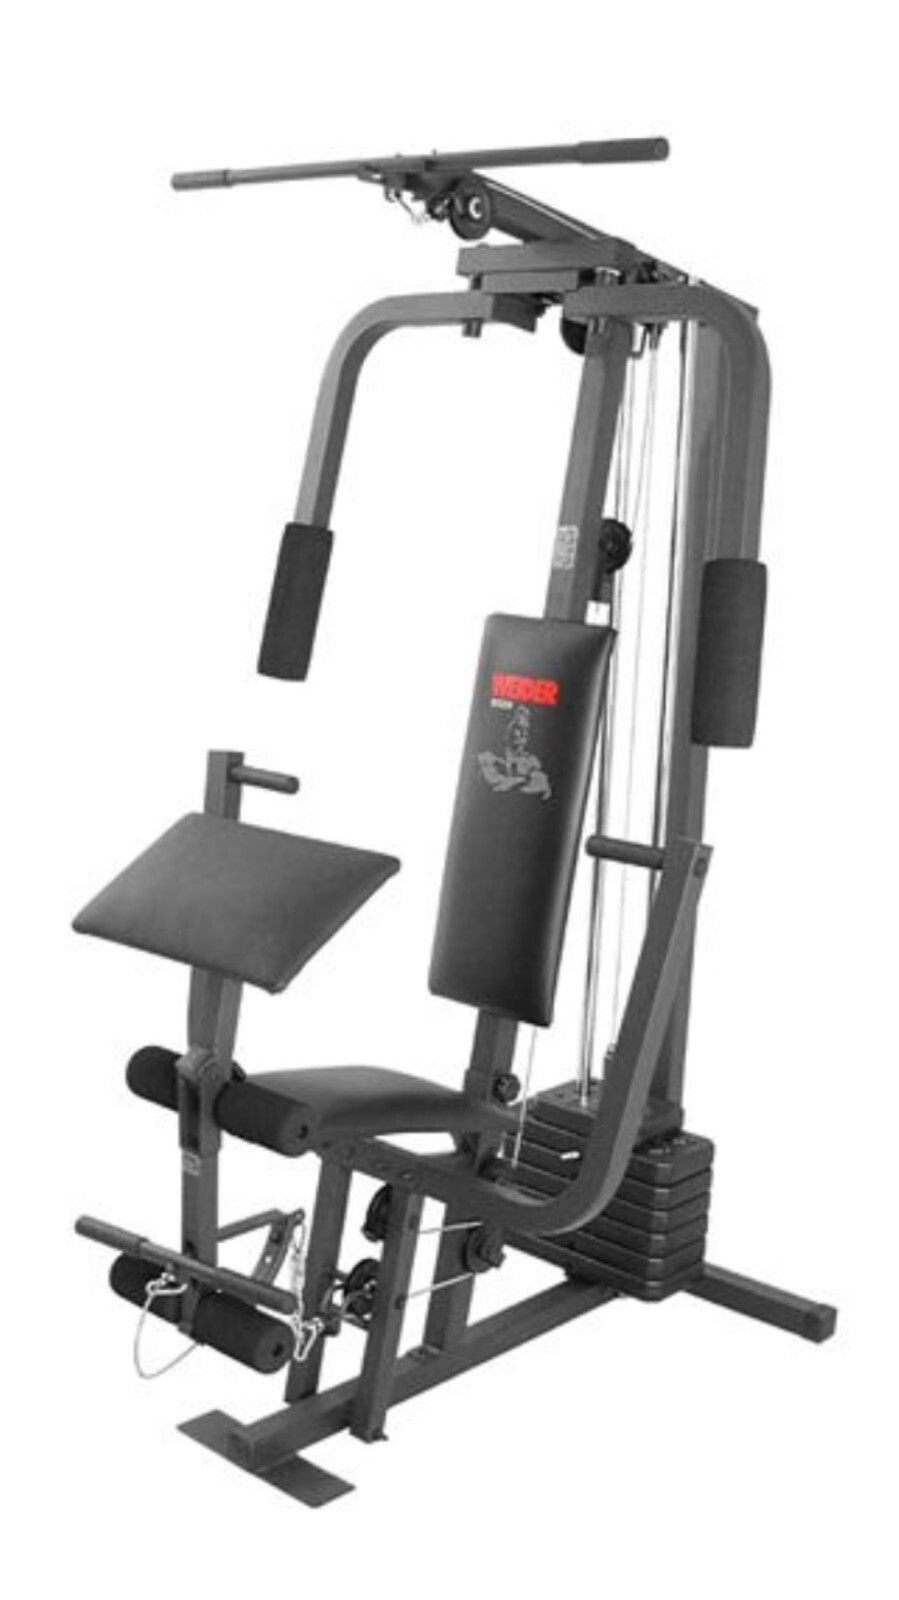 Weider 8525 portable home gym weight station